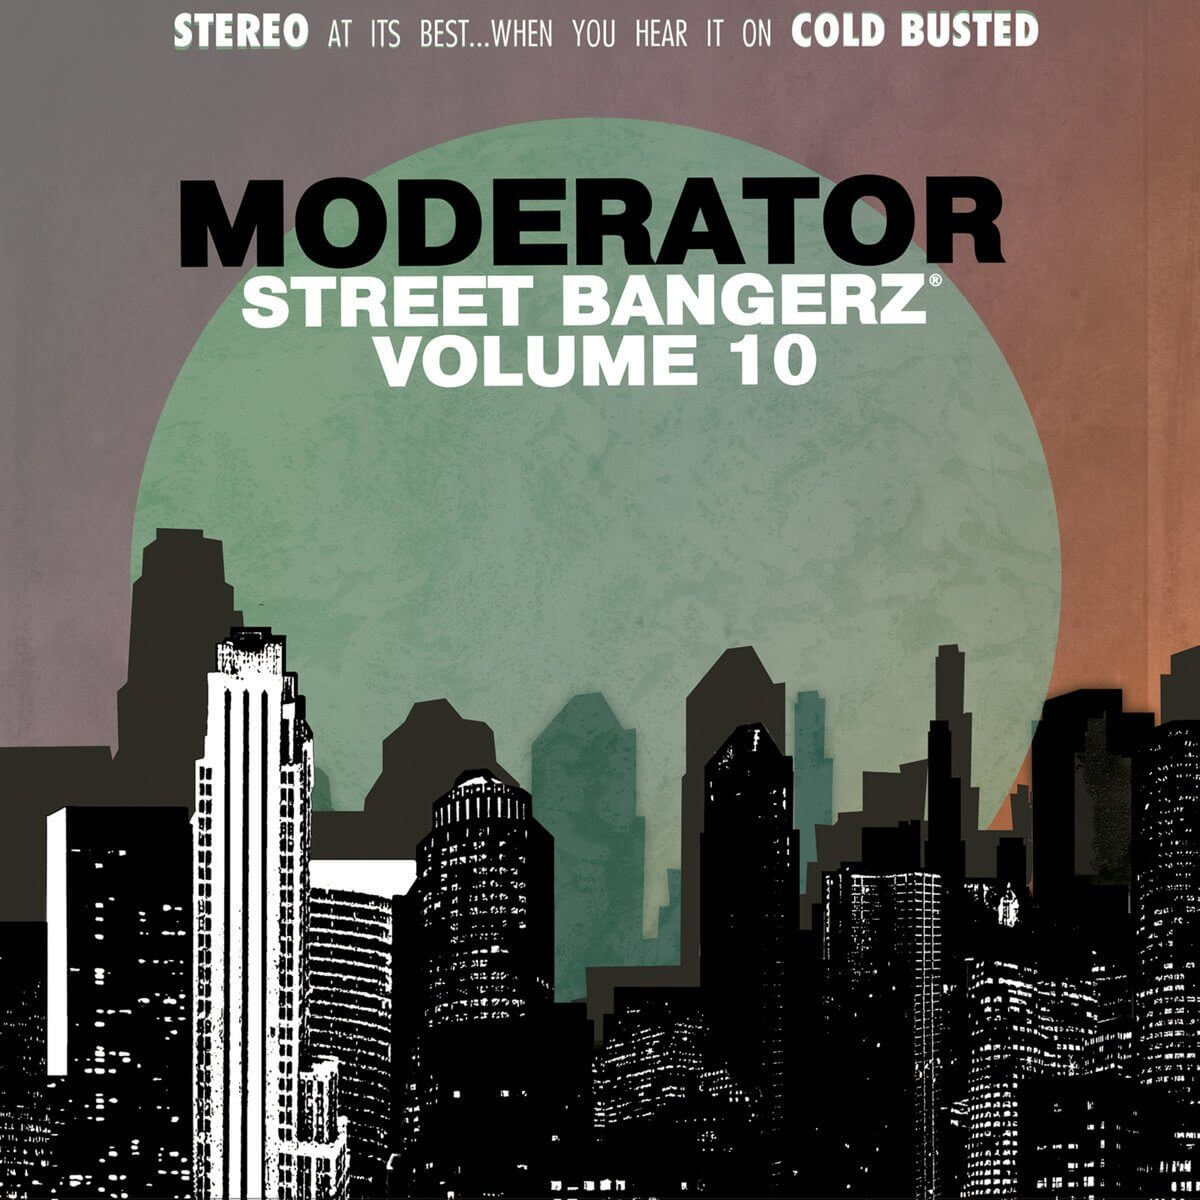 Moderator - Street Bangerz Volume 10 - Limited Edition Solid White Colored 12 Inch Vinyl - Cold Busted